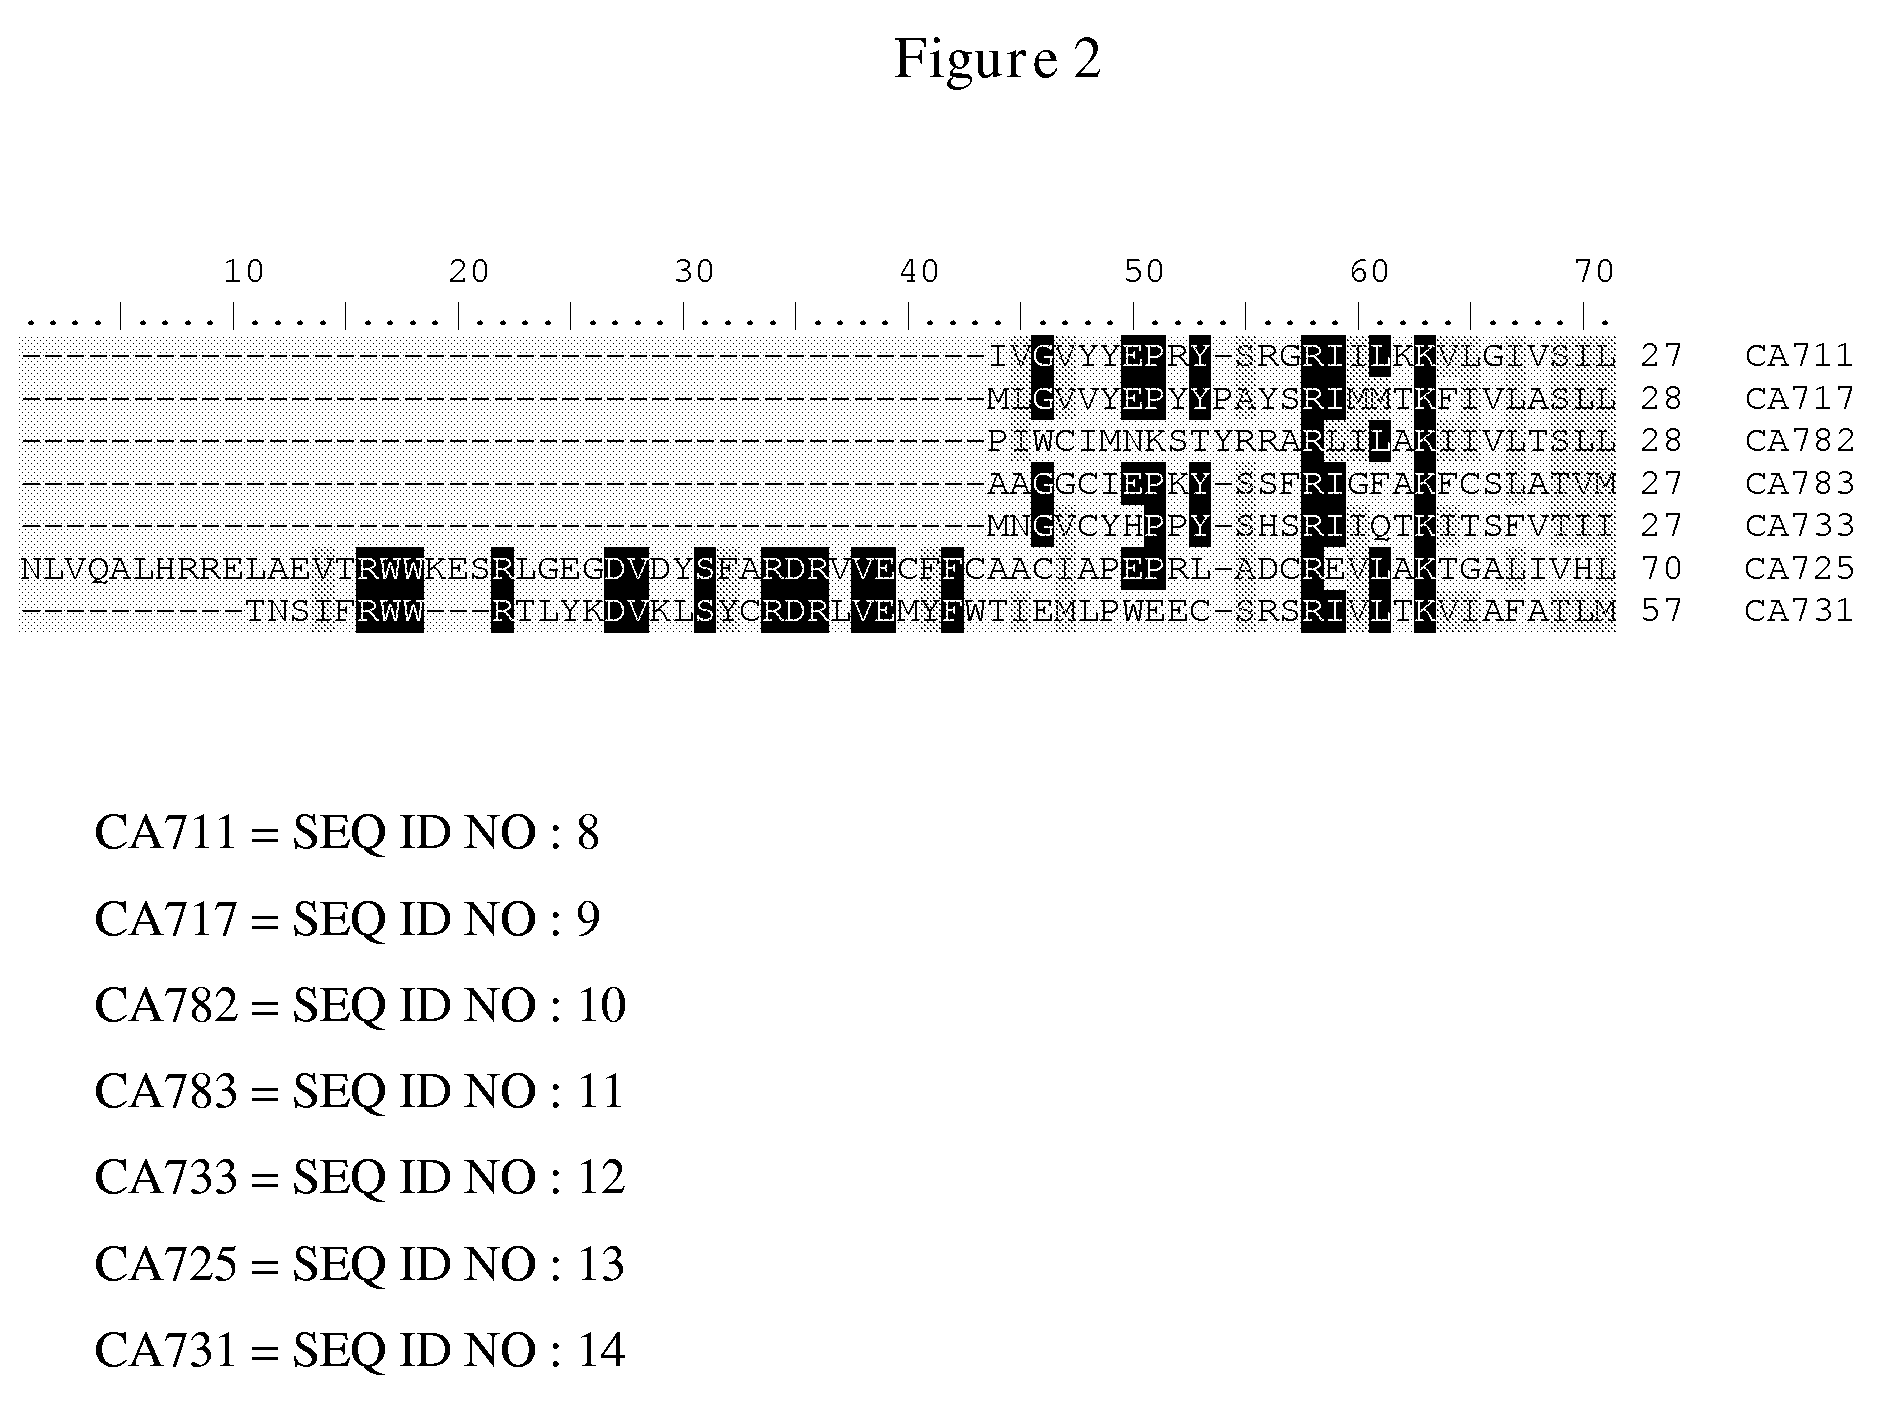 Sesquiterpene synthases and methods of their use